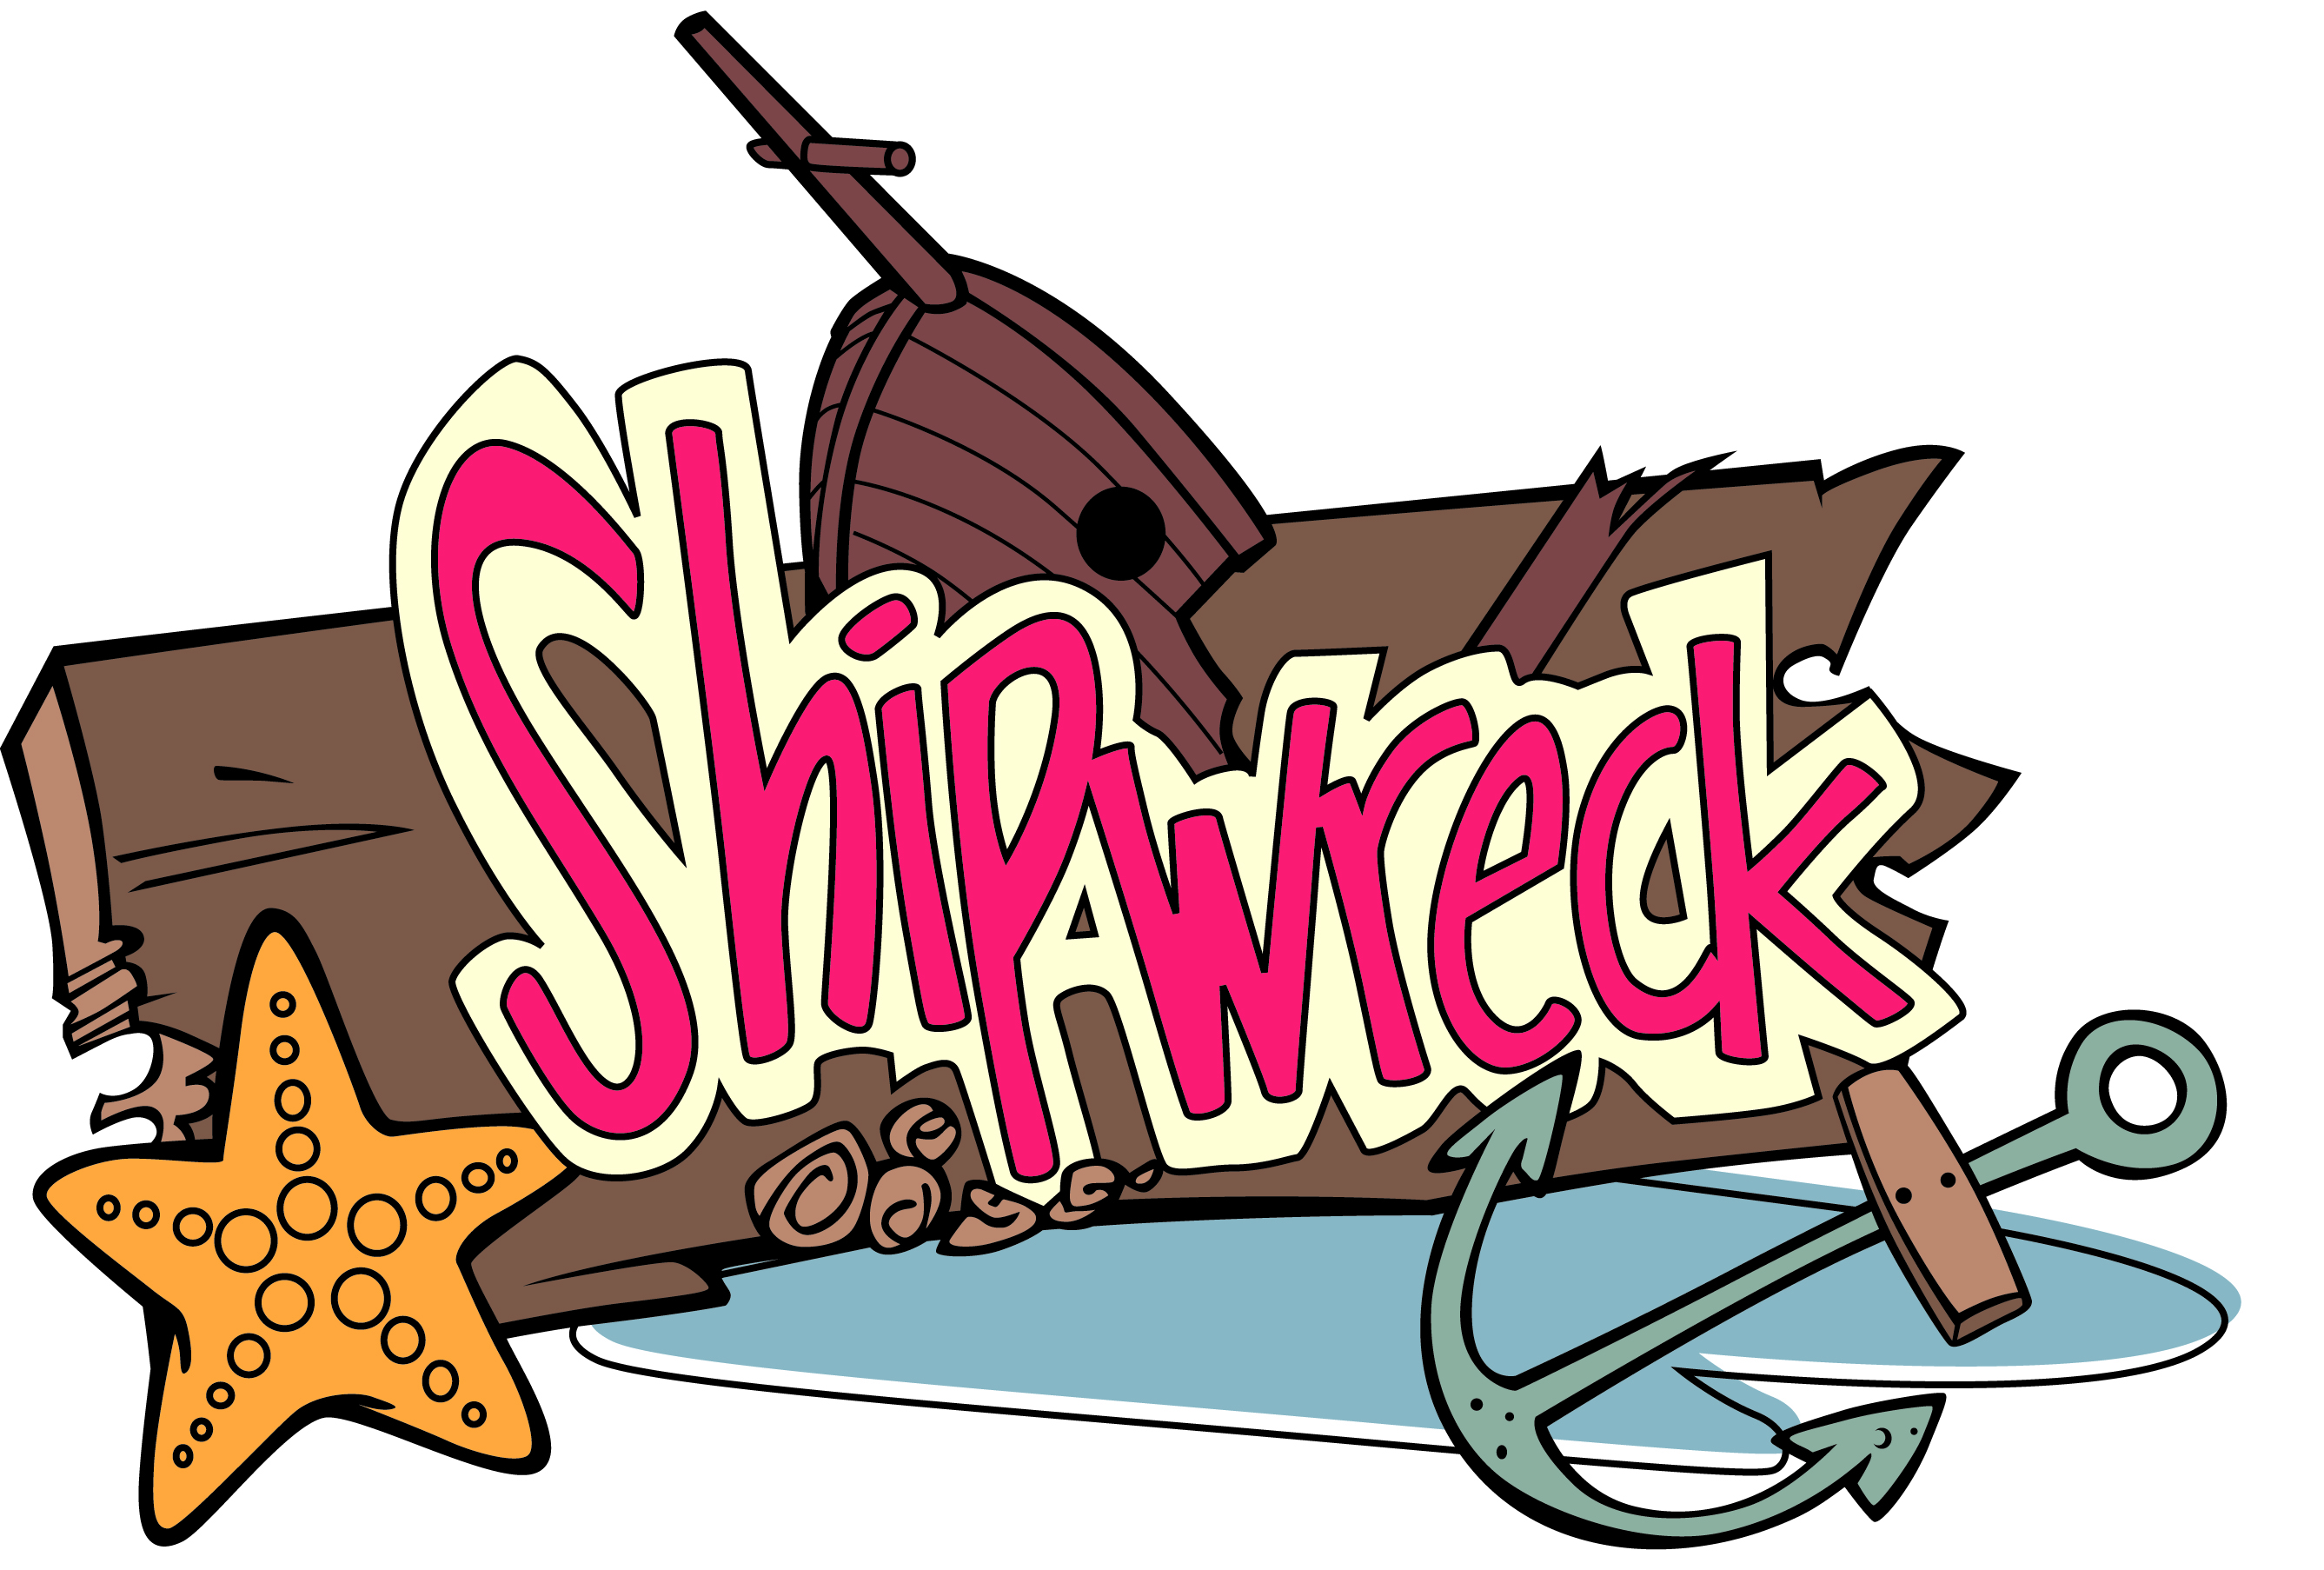 Shipwreck Party--August 15 - Pass Christian Yacht Club